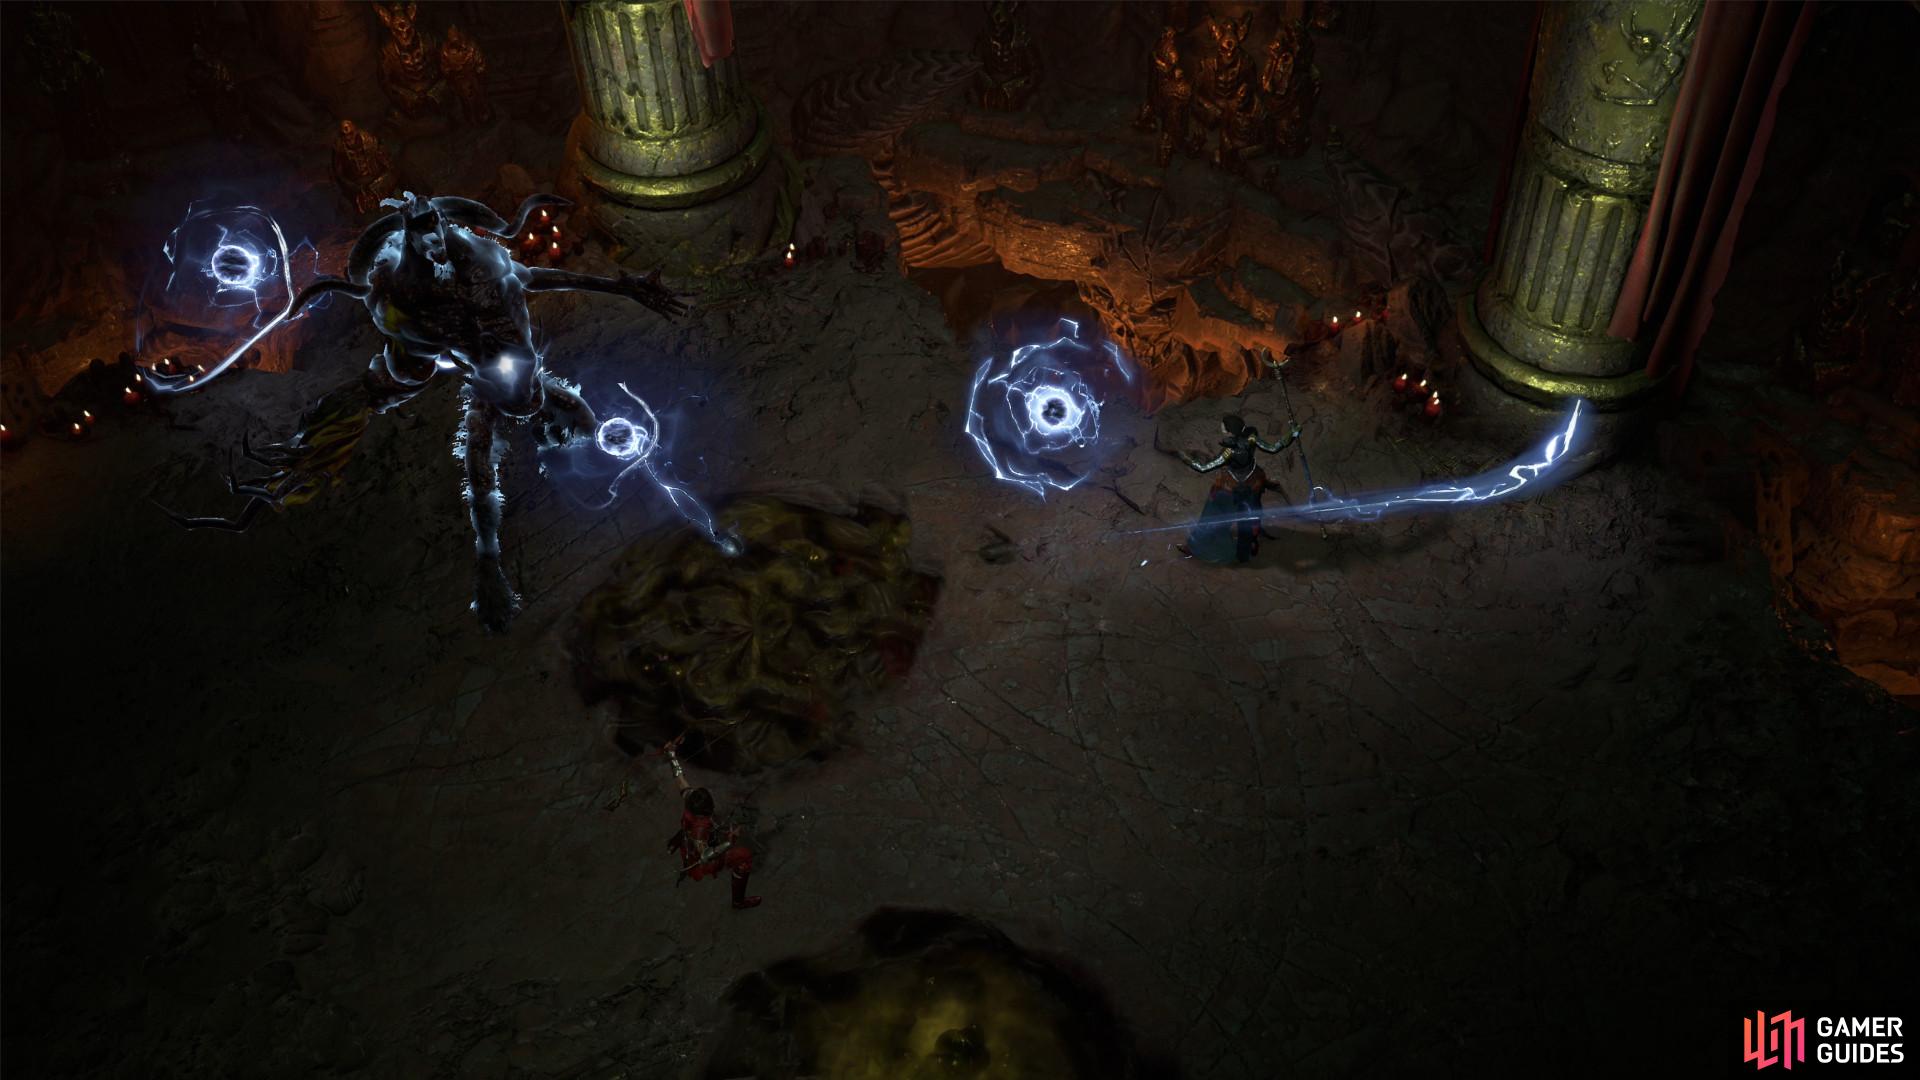 The Lightning Build relies on procs of energy to deal burst, AOE and crit-improving damage. Image via Blizzard Entertainment.